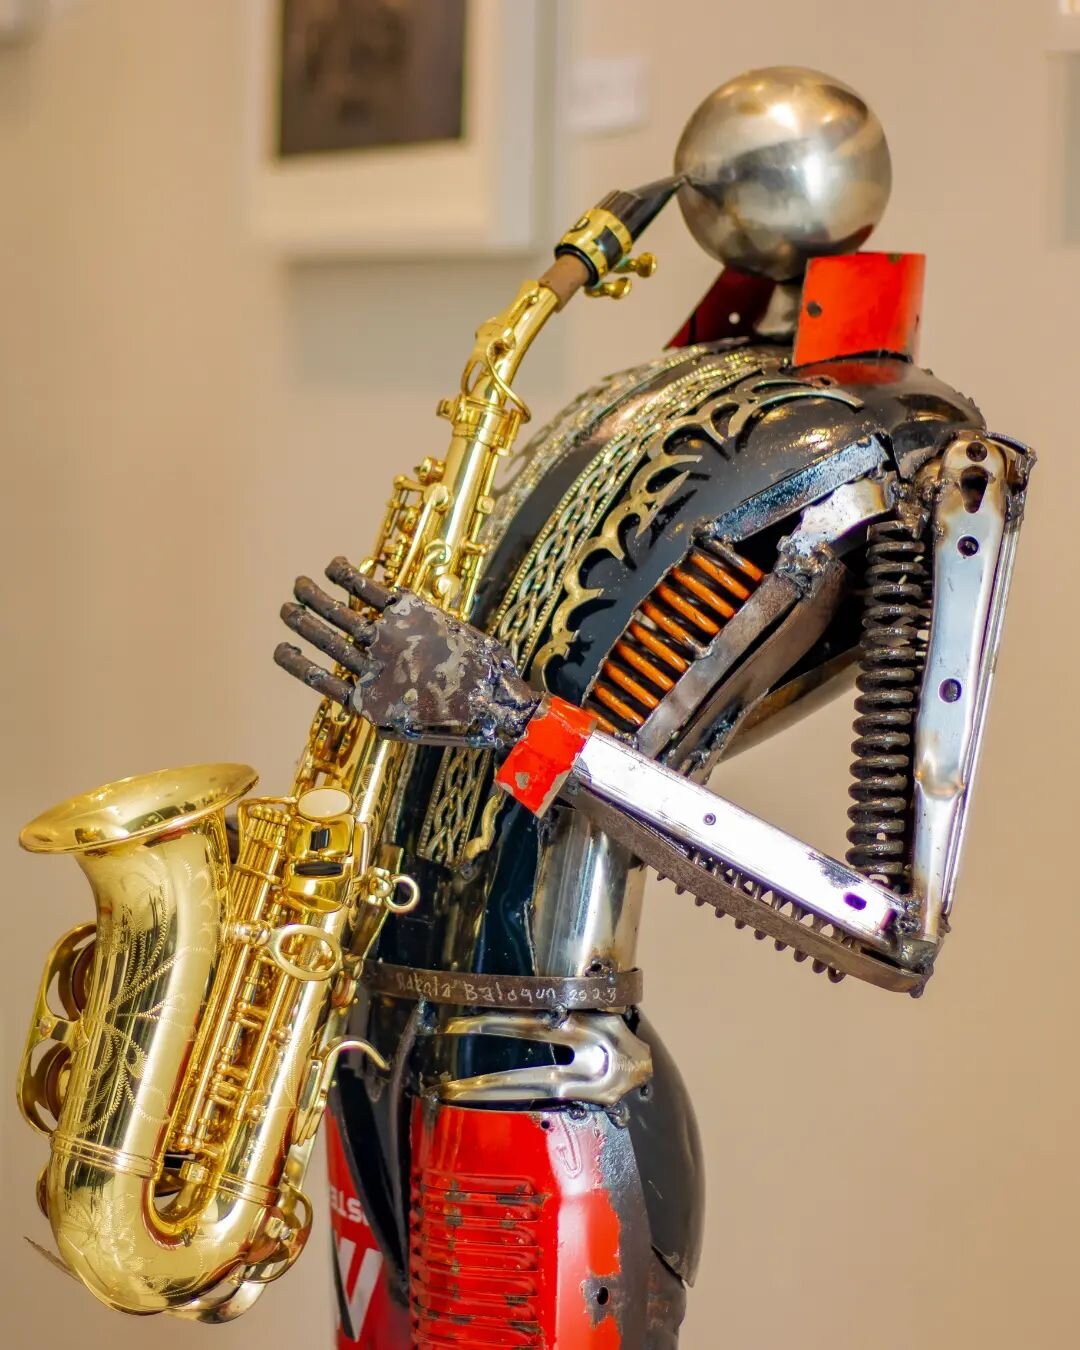 &quot;Maestro&quot; by Adeola Balogun @adeola.balogun.66 
This is a humanoid welded metal piece that referenced the legendary Fela. He was a multi-instrumentalist that spoke truth to power with his music. He was here captured at the zenith of a perfo